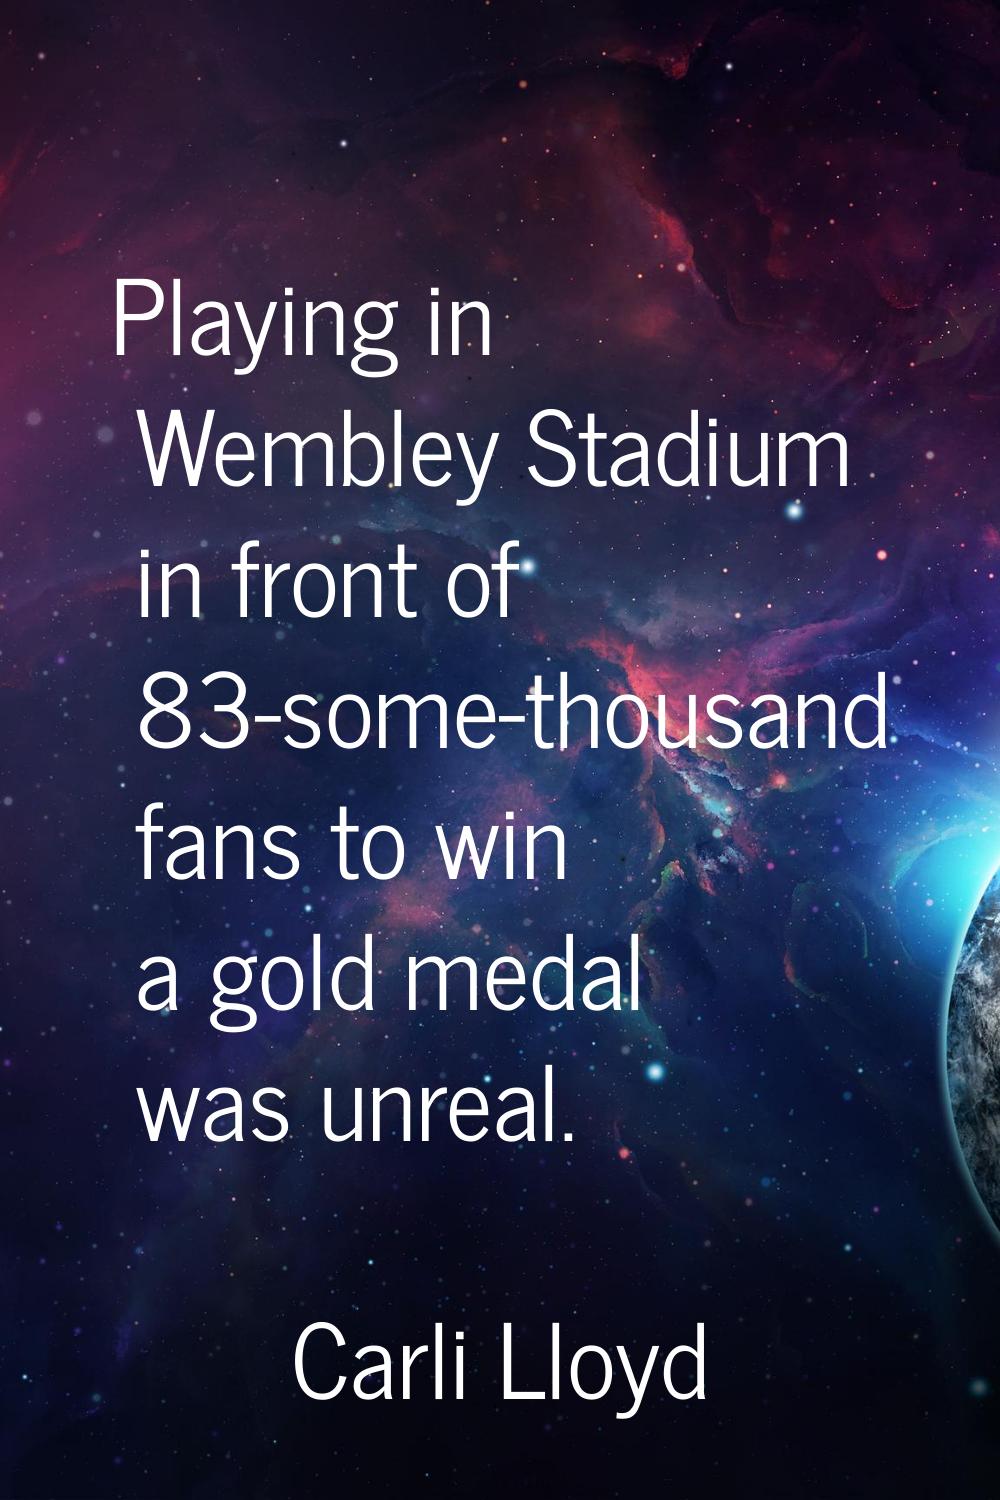 Playing in Wembley Stadium in front of 83-some-thousand fans to win a gold medal was unreal.